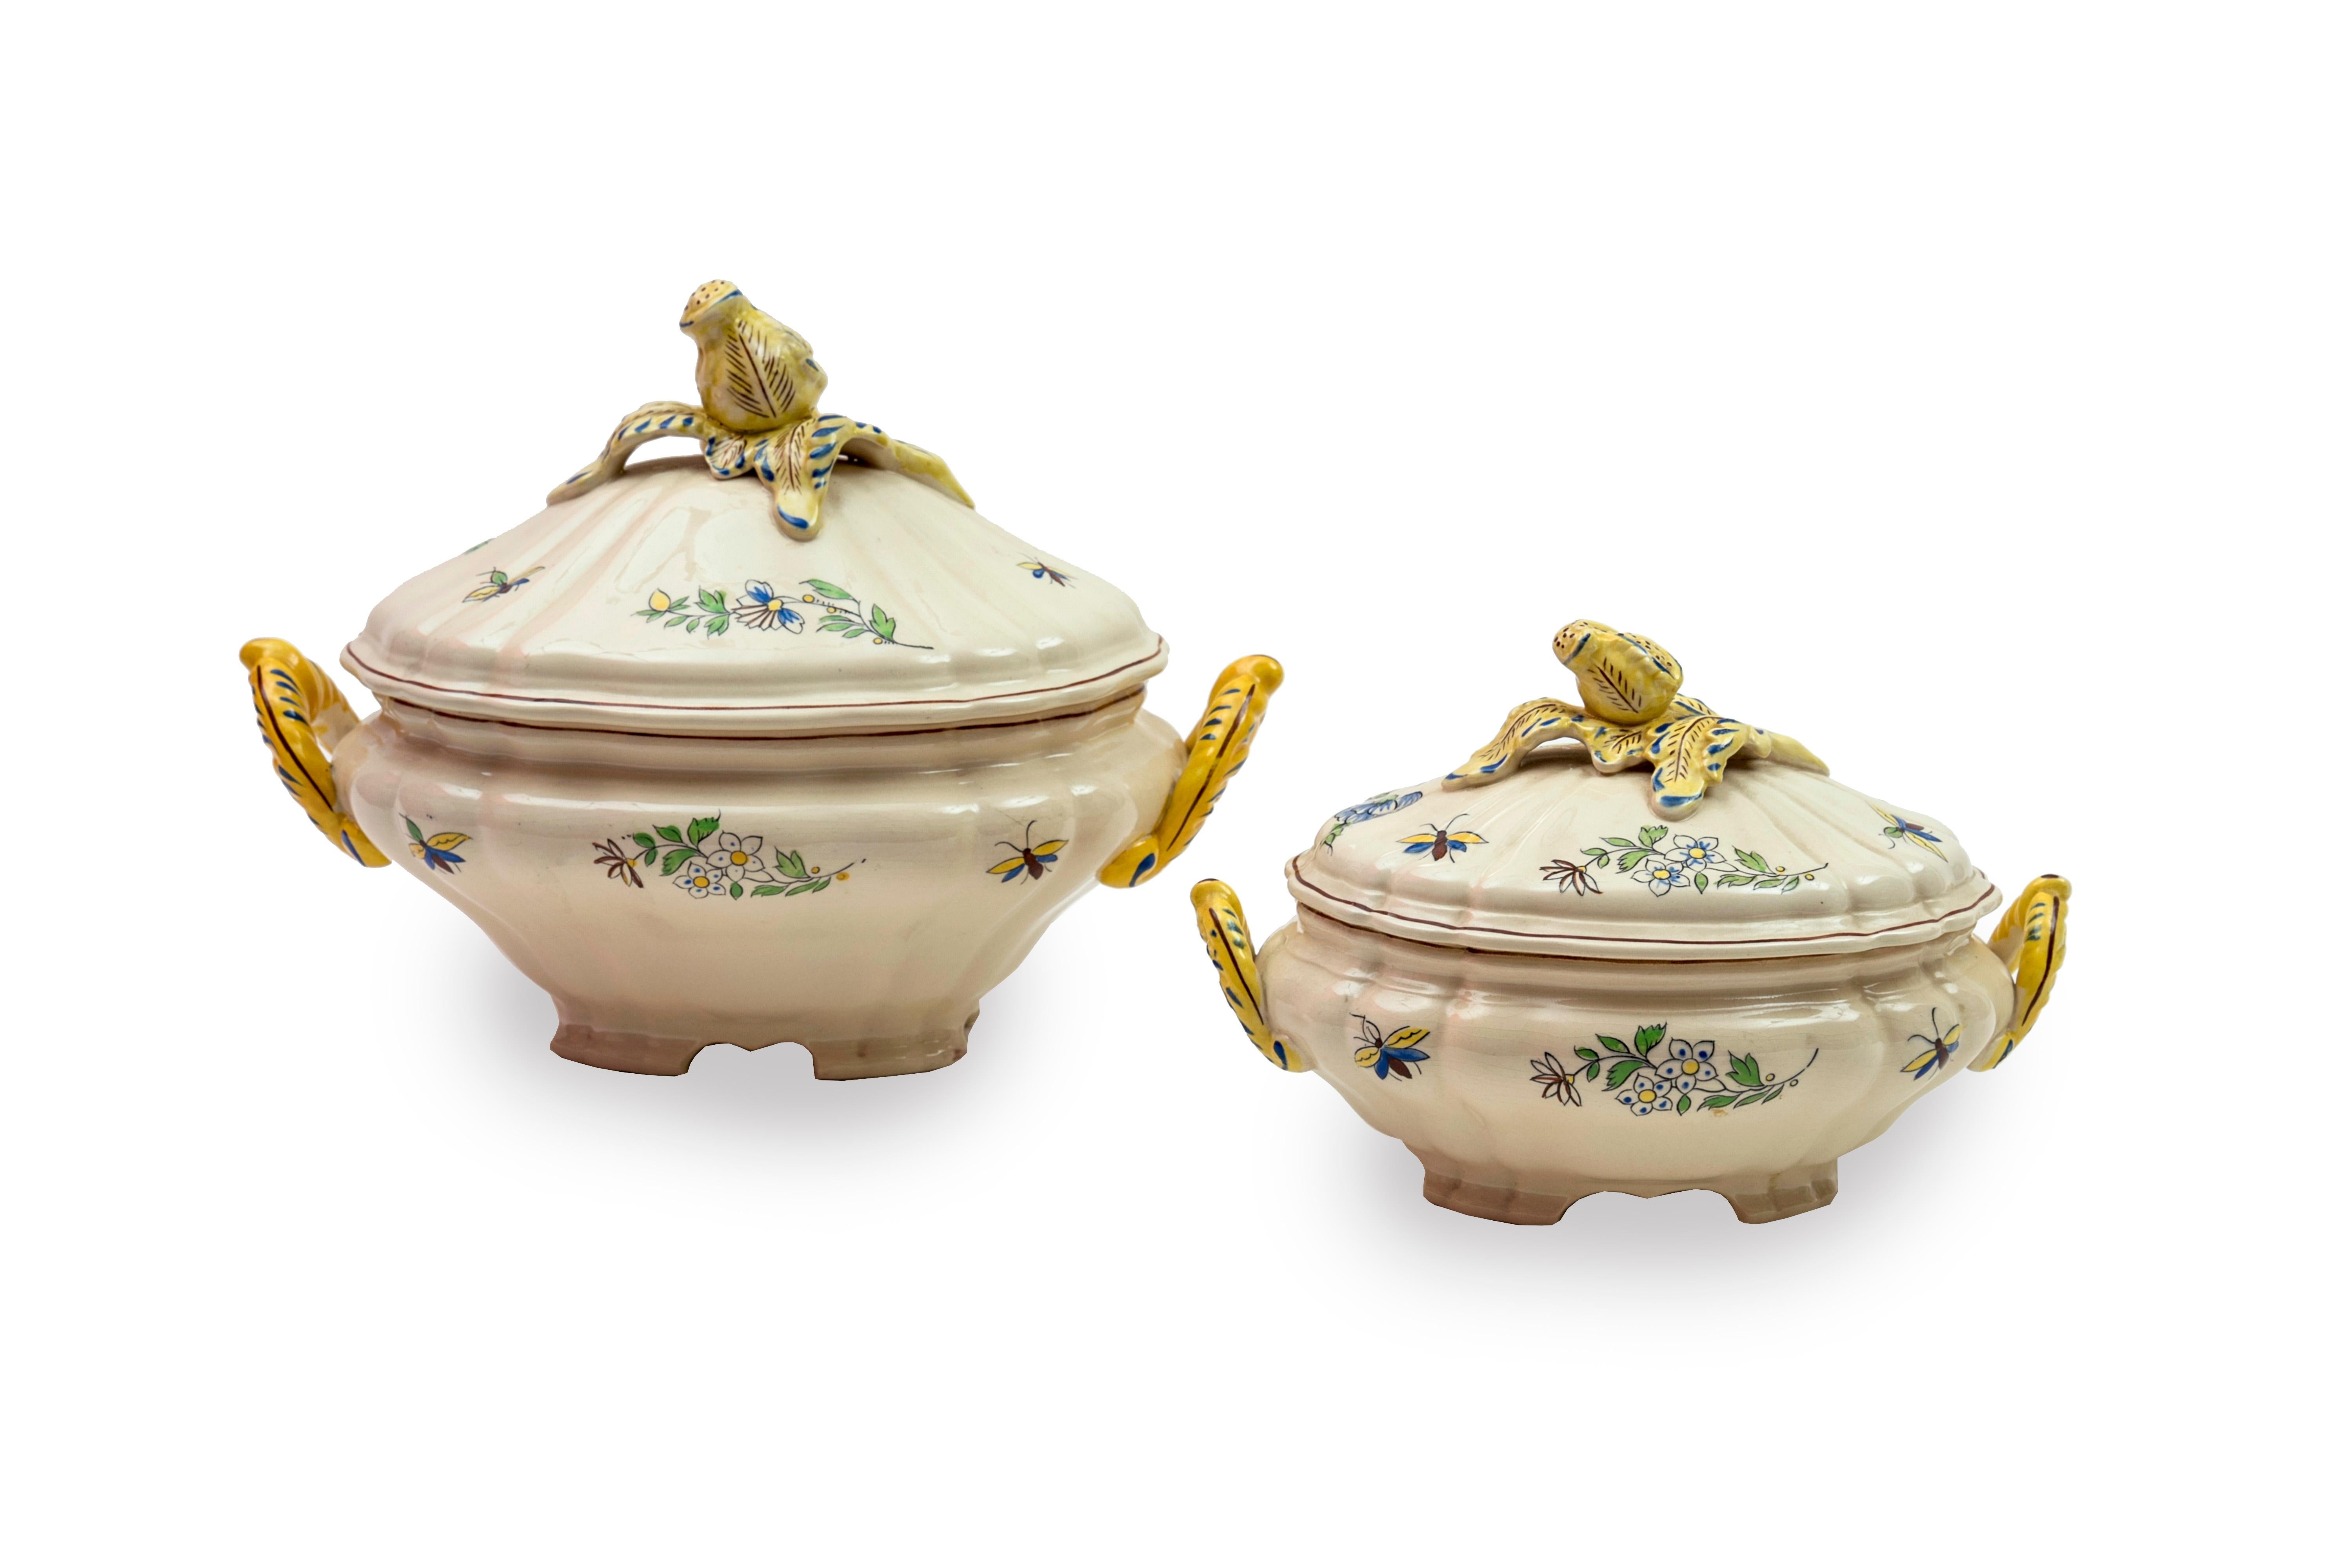 Faience Table Service with Cornucopias, Keramis, Boch Freres, Early 20th Century For Sale